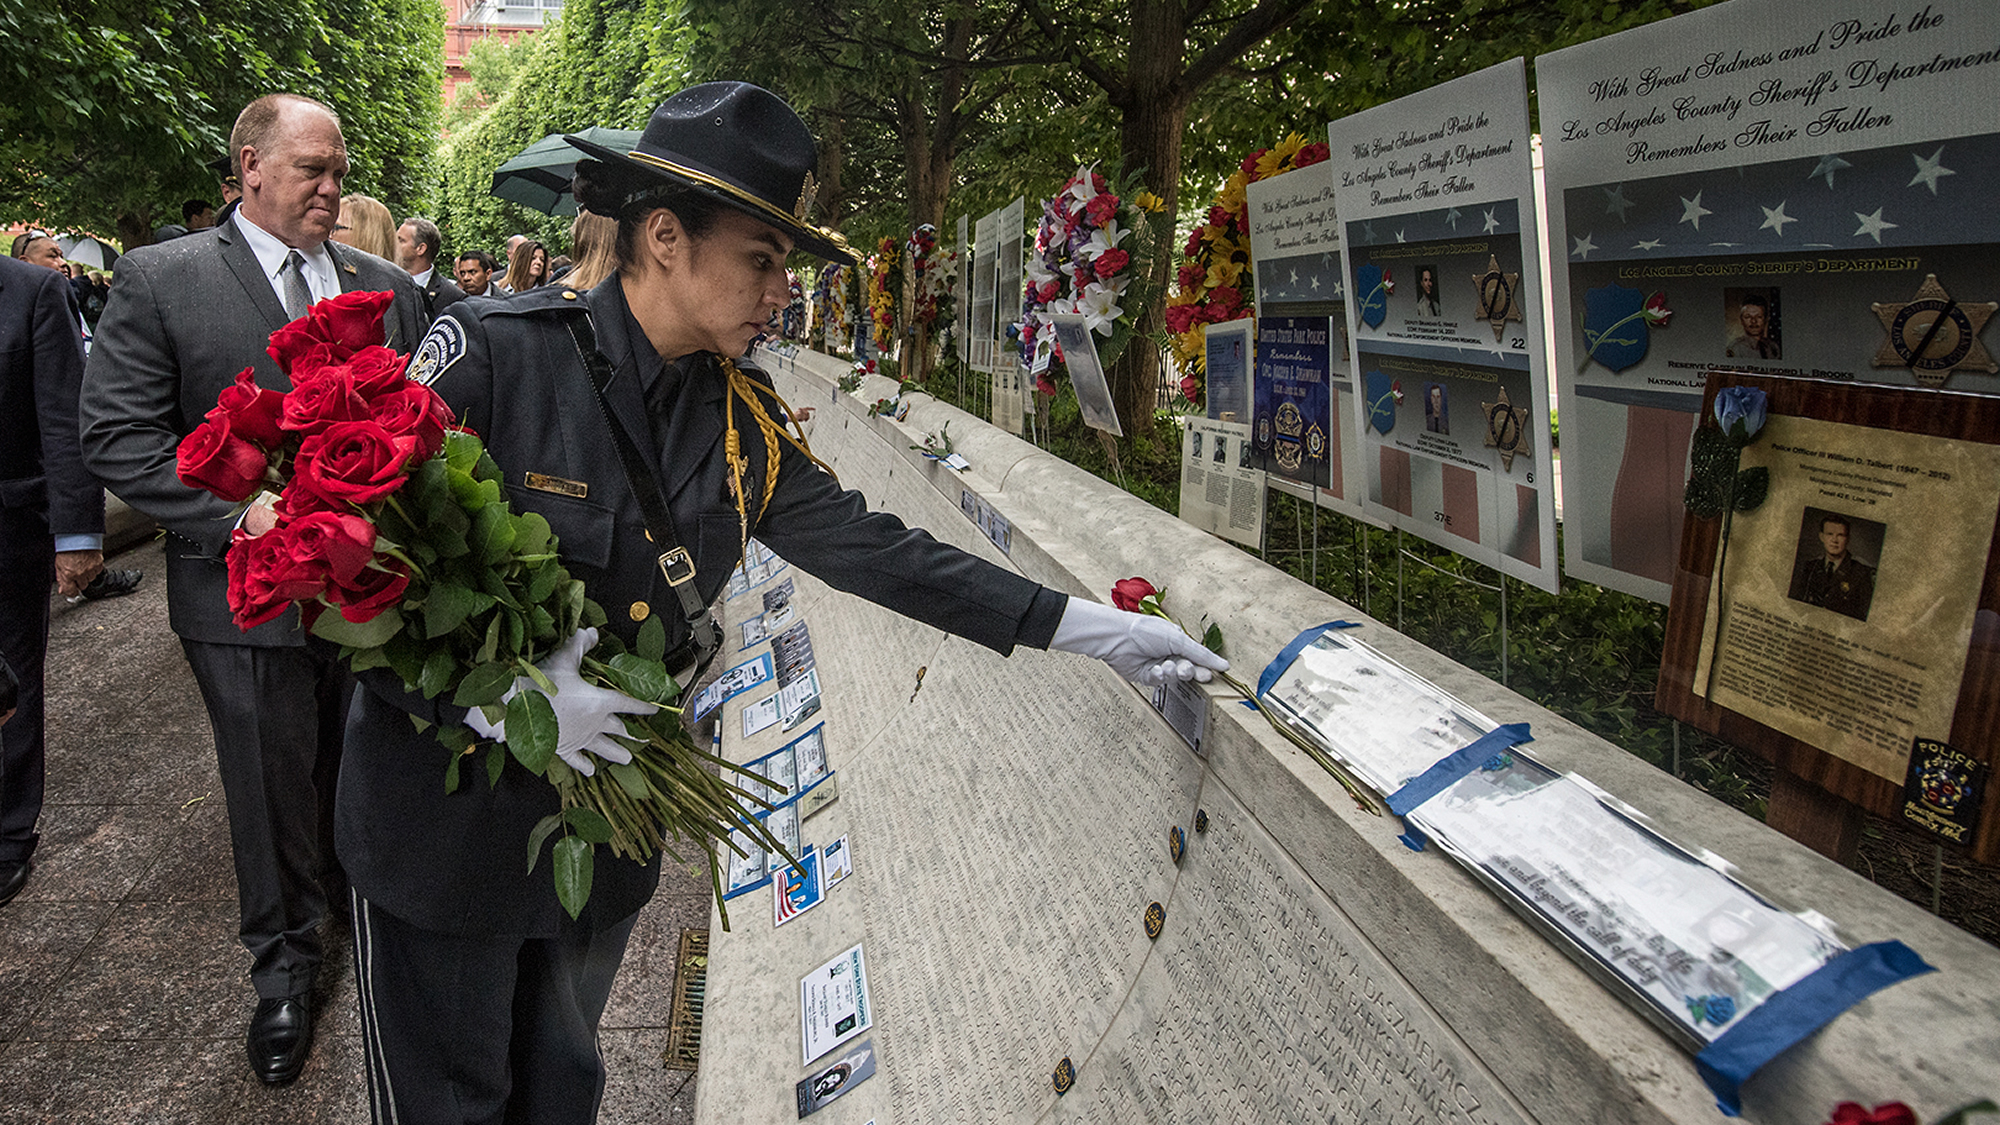  A member of the ICE Honor Guard places a rose above the name of a fallen ICE officer. The members of the Honor Guard walk around the entire National Law Enforcement Officers Memorial in Washington, D.C., and lay roses at every fallen ICE officers name.